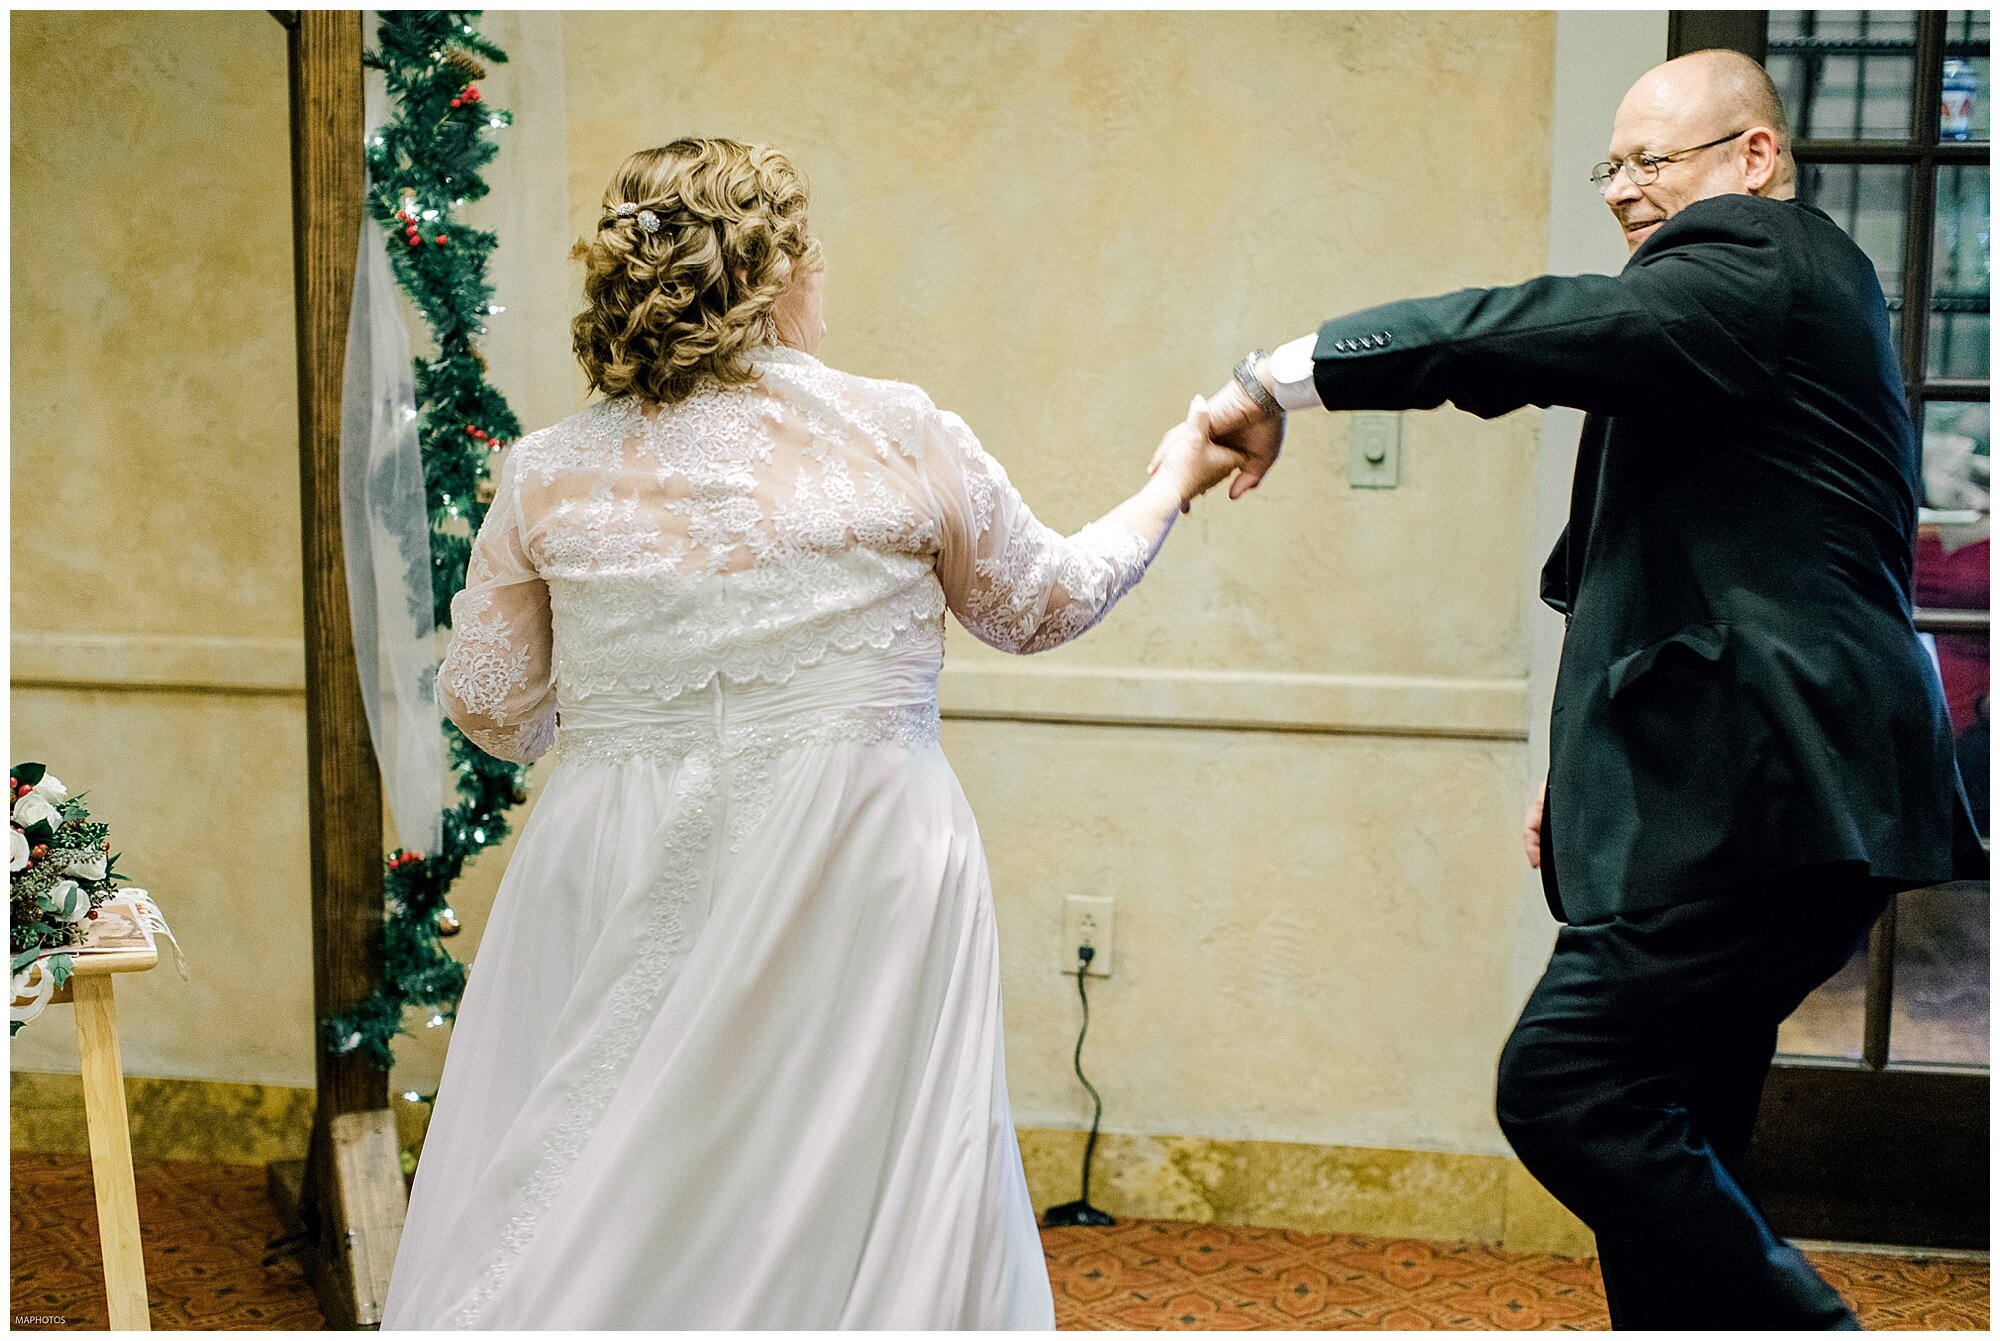 Epic First Dance!